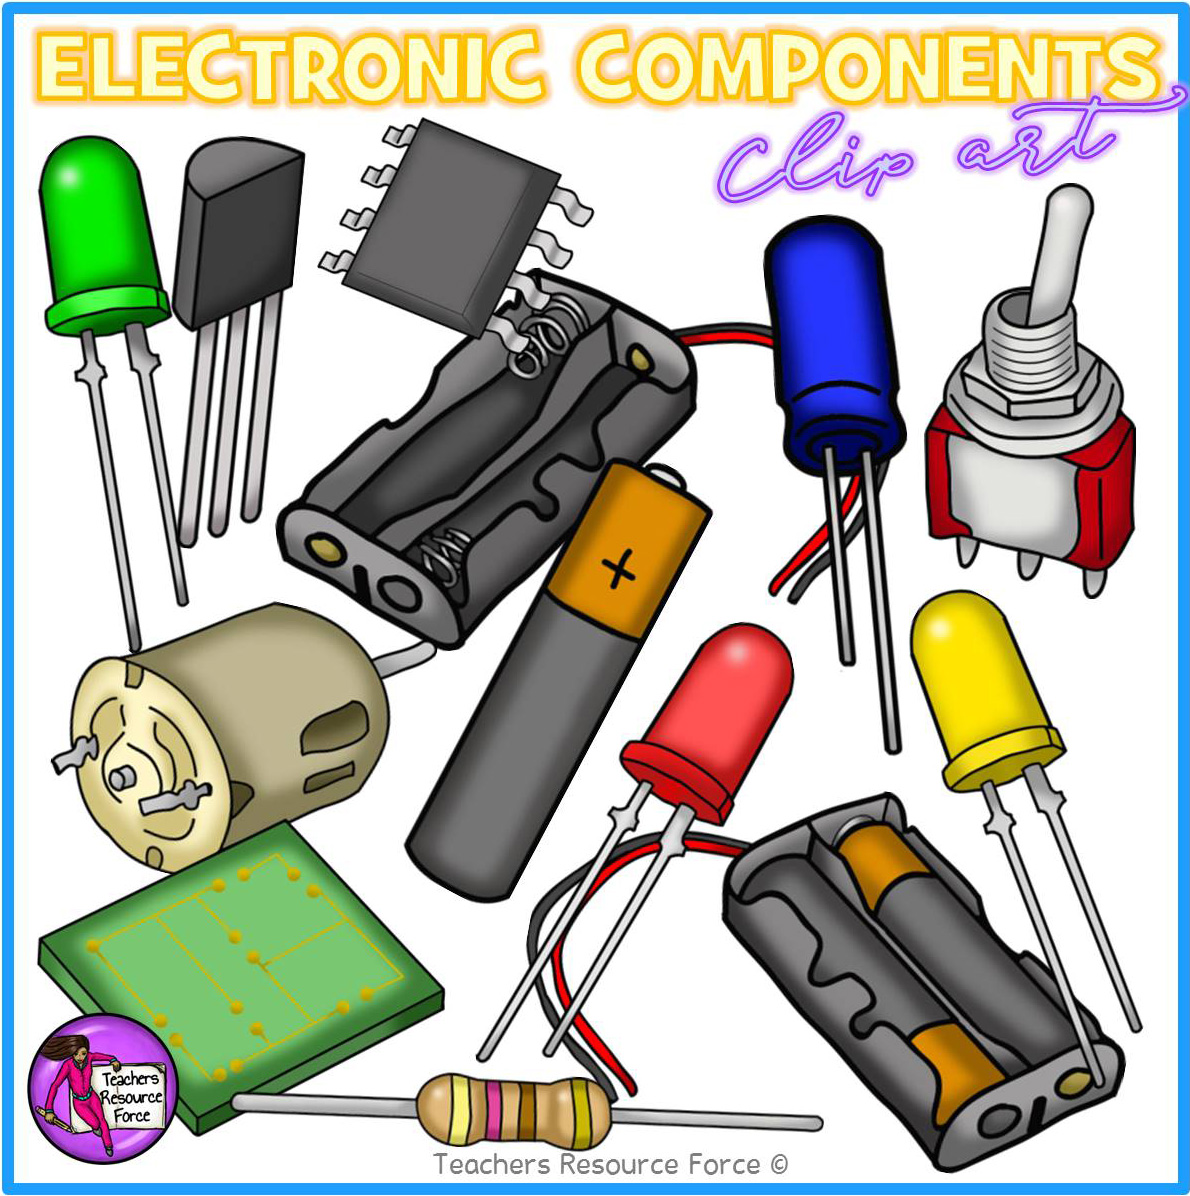 Electronic Components and Circuit Symbols Clip Art - shop.trf.one